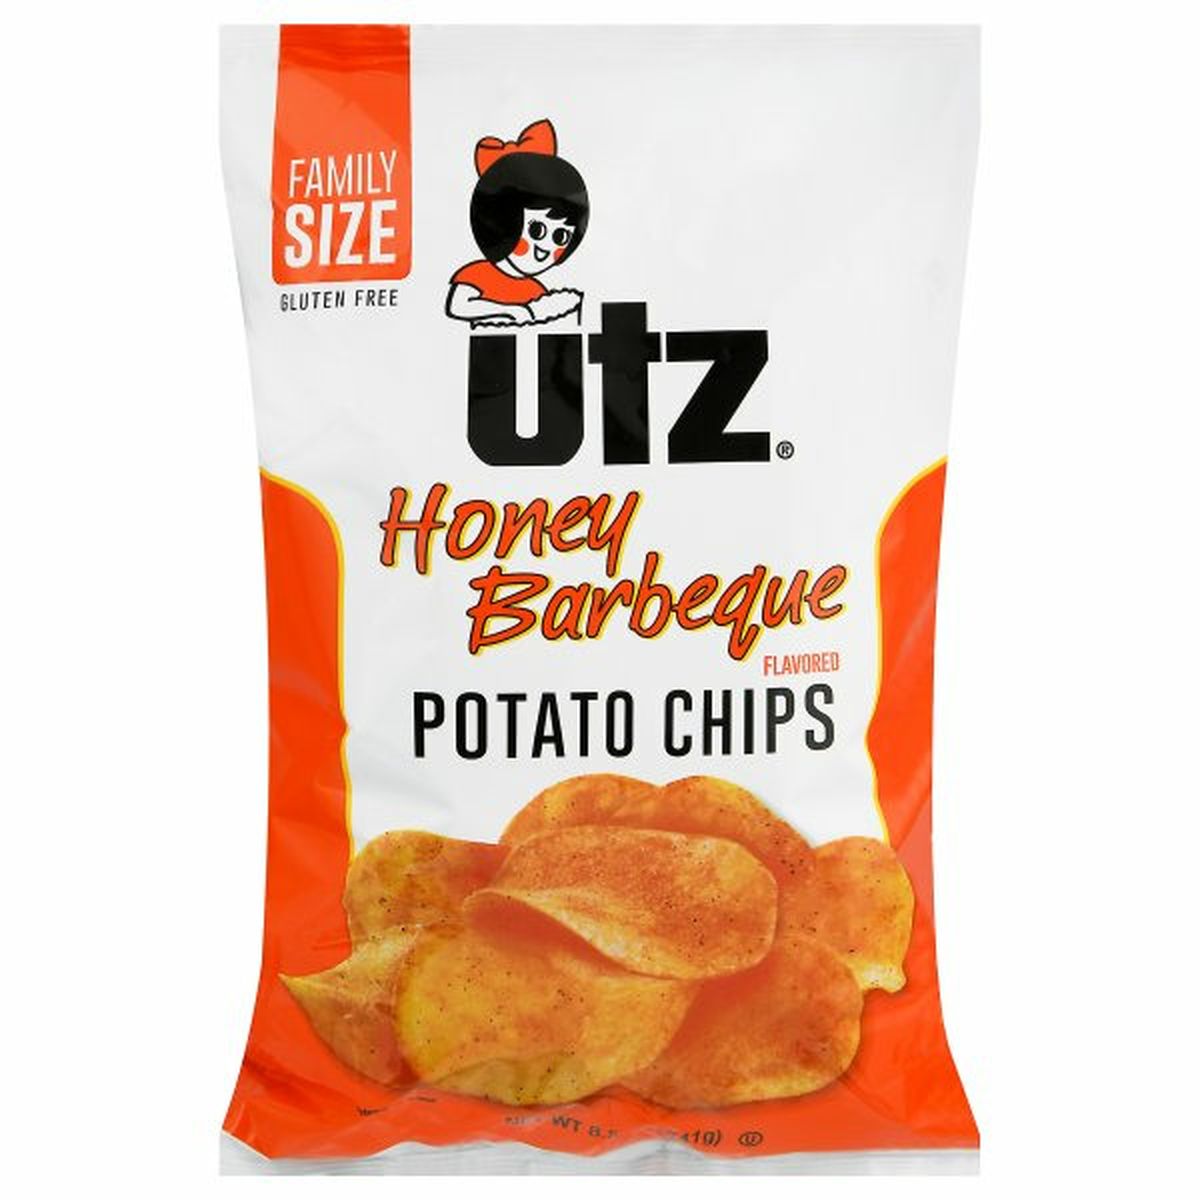 Calories in Utz Potato Chips, Honey Barbeque Flavored, Family Size